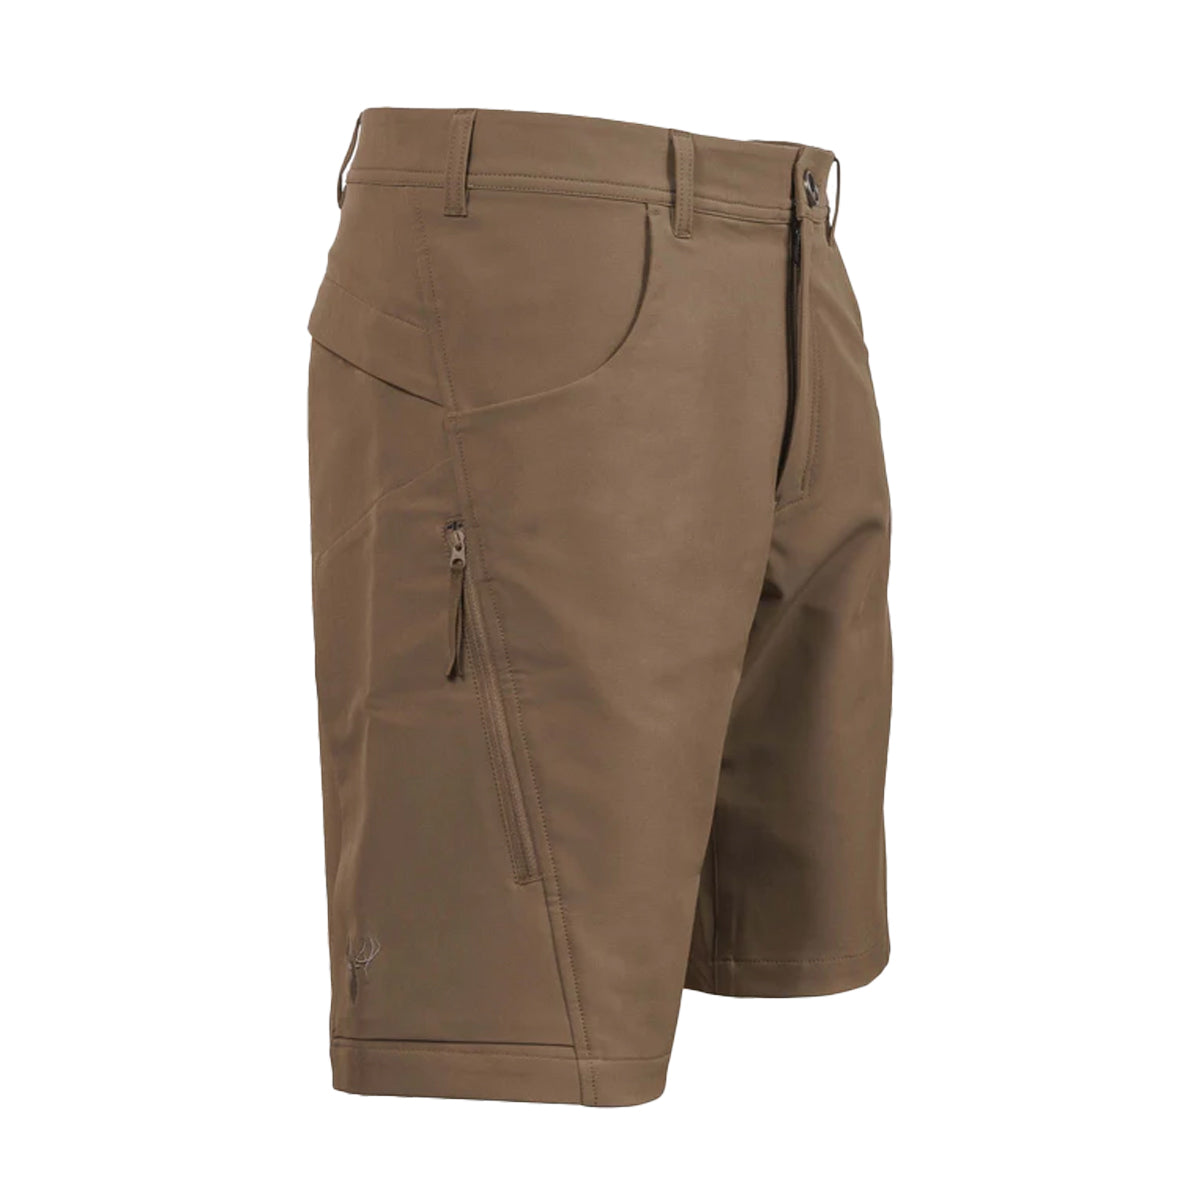 King's Ridge Shorts in  by GOHUNT | King's - GOHUNT Shop